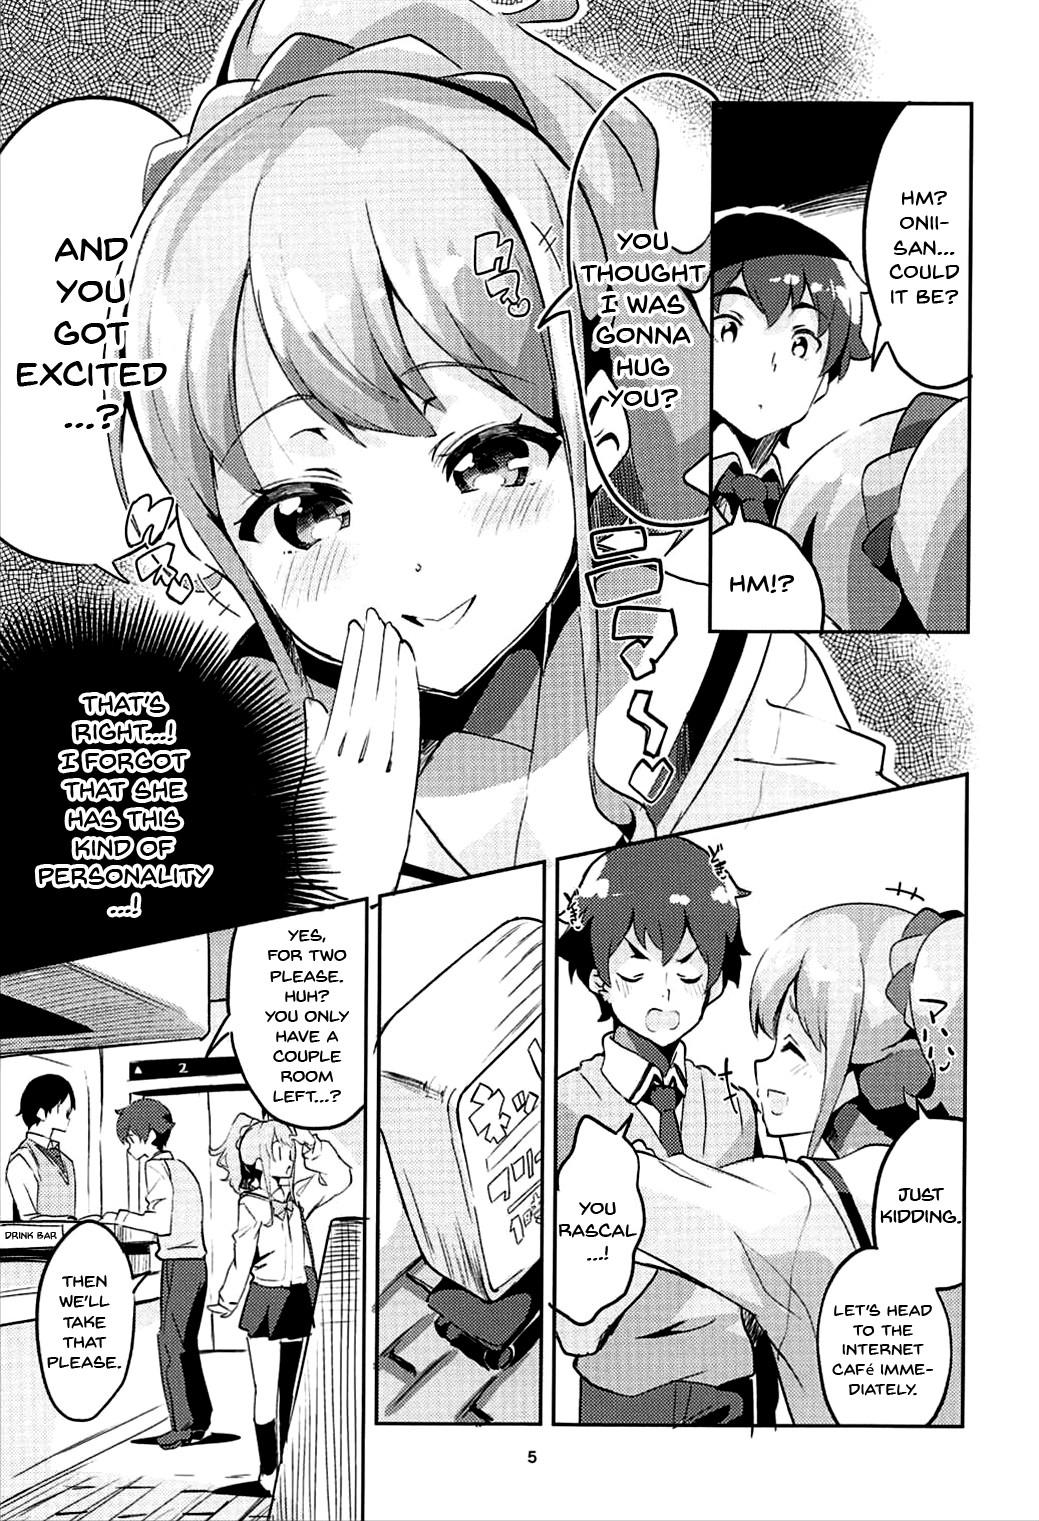 Exhibitionist Jinno Megumi to NeCafe no Couple Seat de Ichaicha suru Hon | Making Out With Jinno Megumi On A Couple Seat Of The NeCafe - Eromanga sensei Inked - Page 4